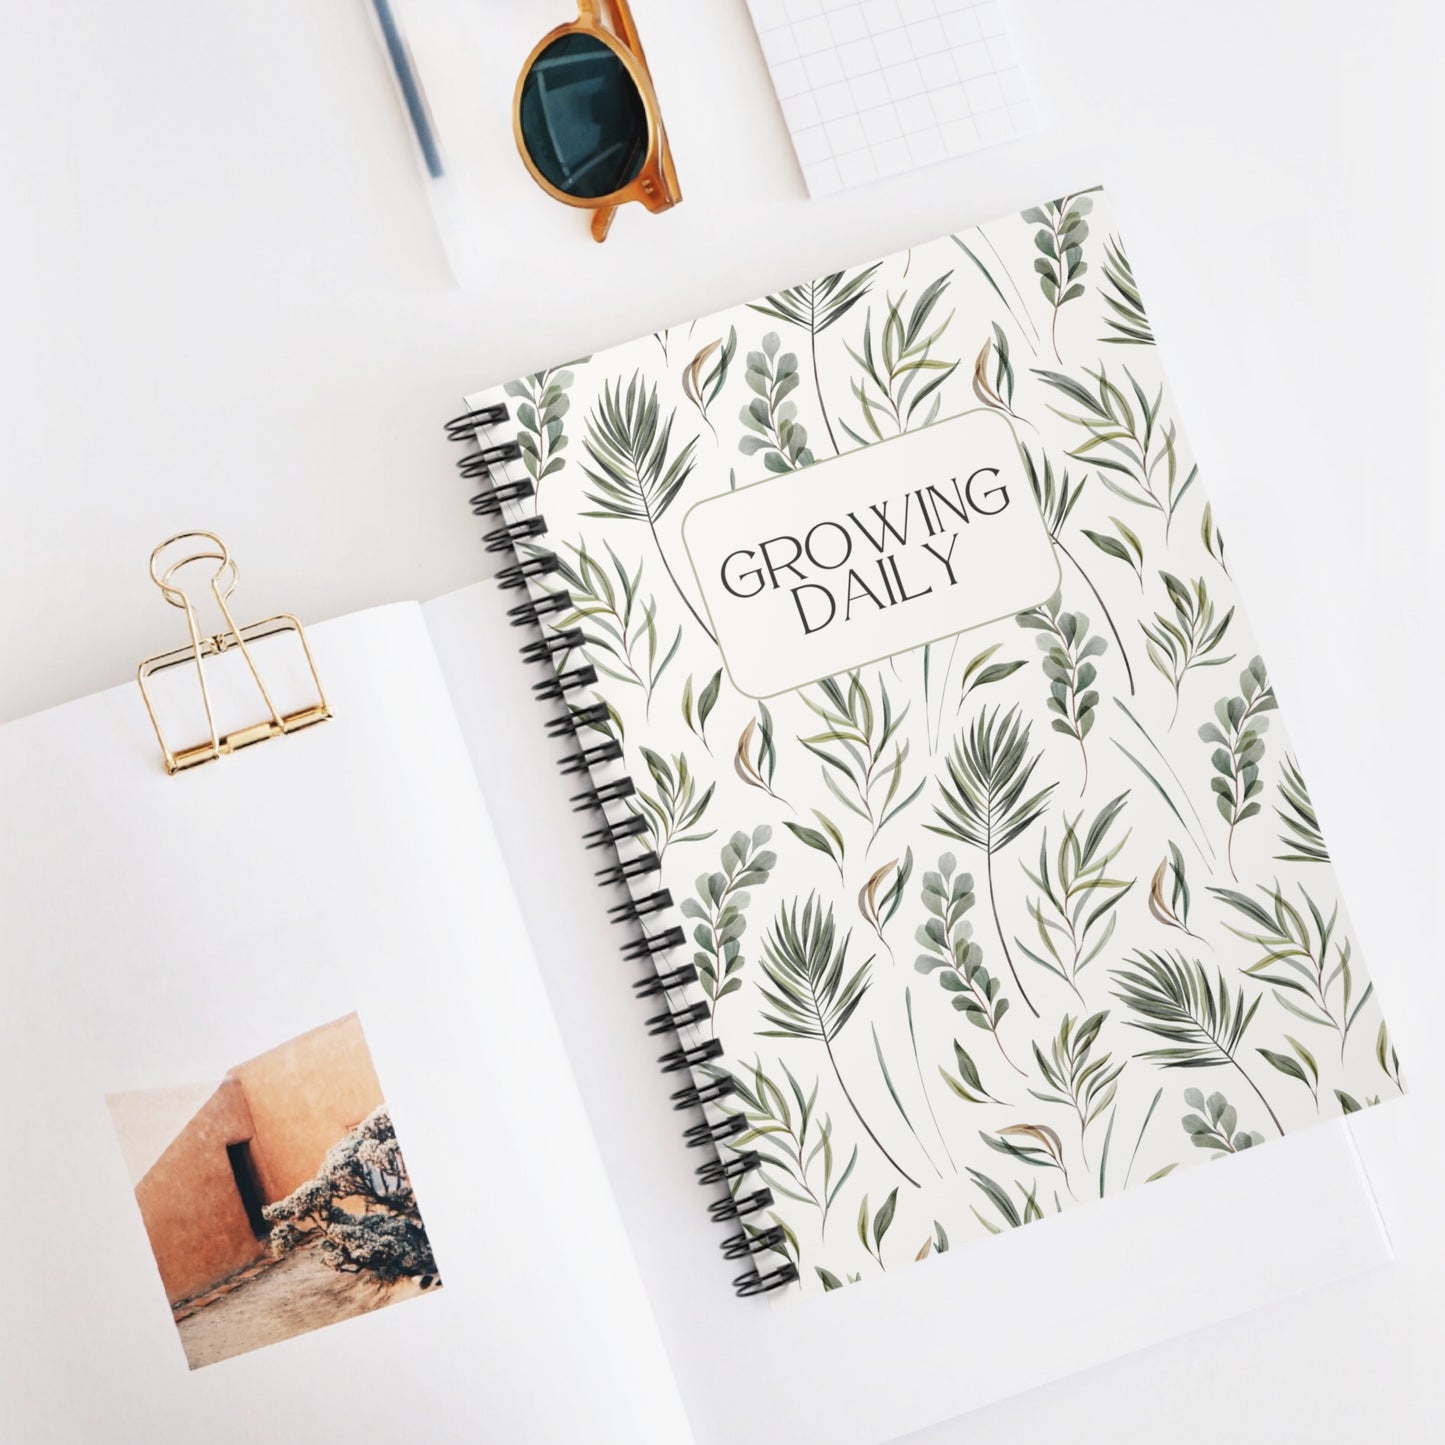 Growing Daily Notebook